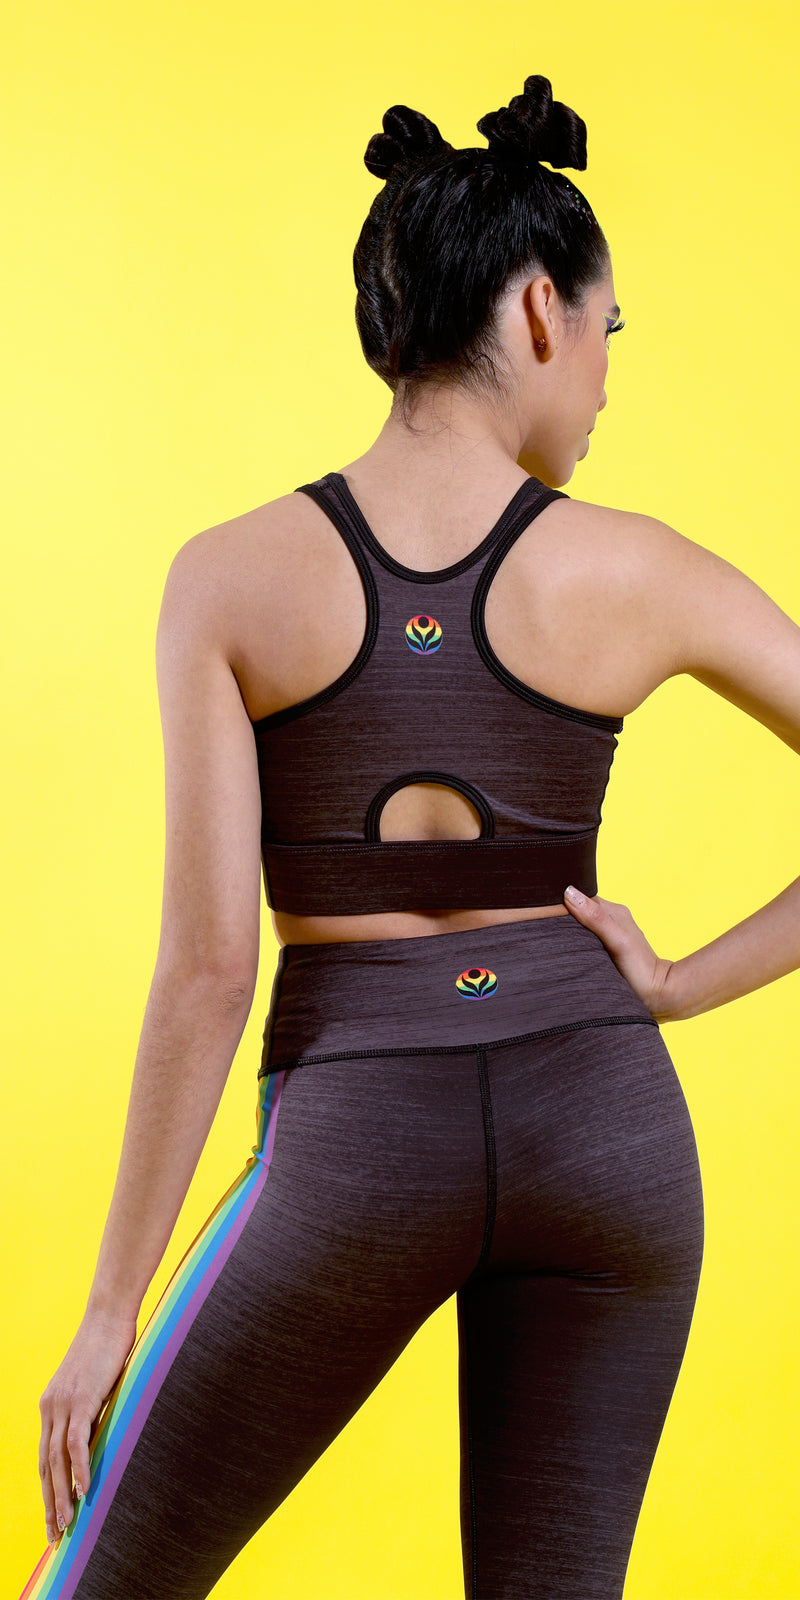 Humans for Pride - Sports Bra